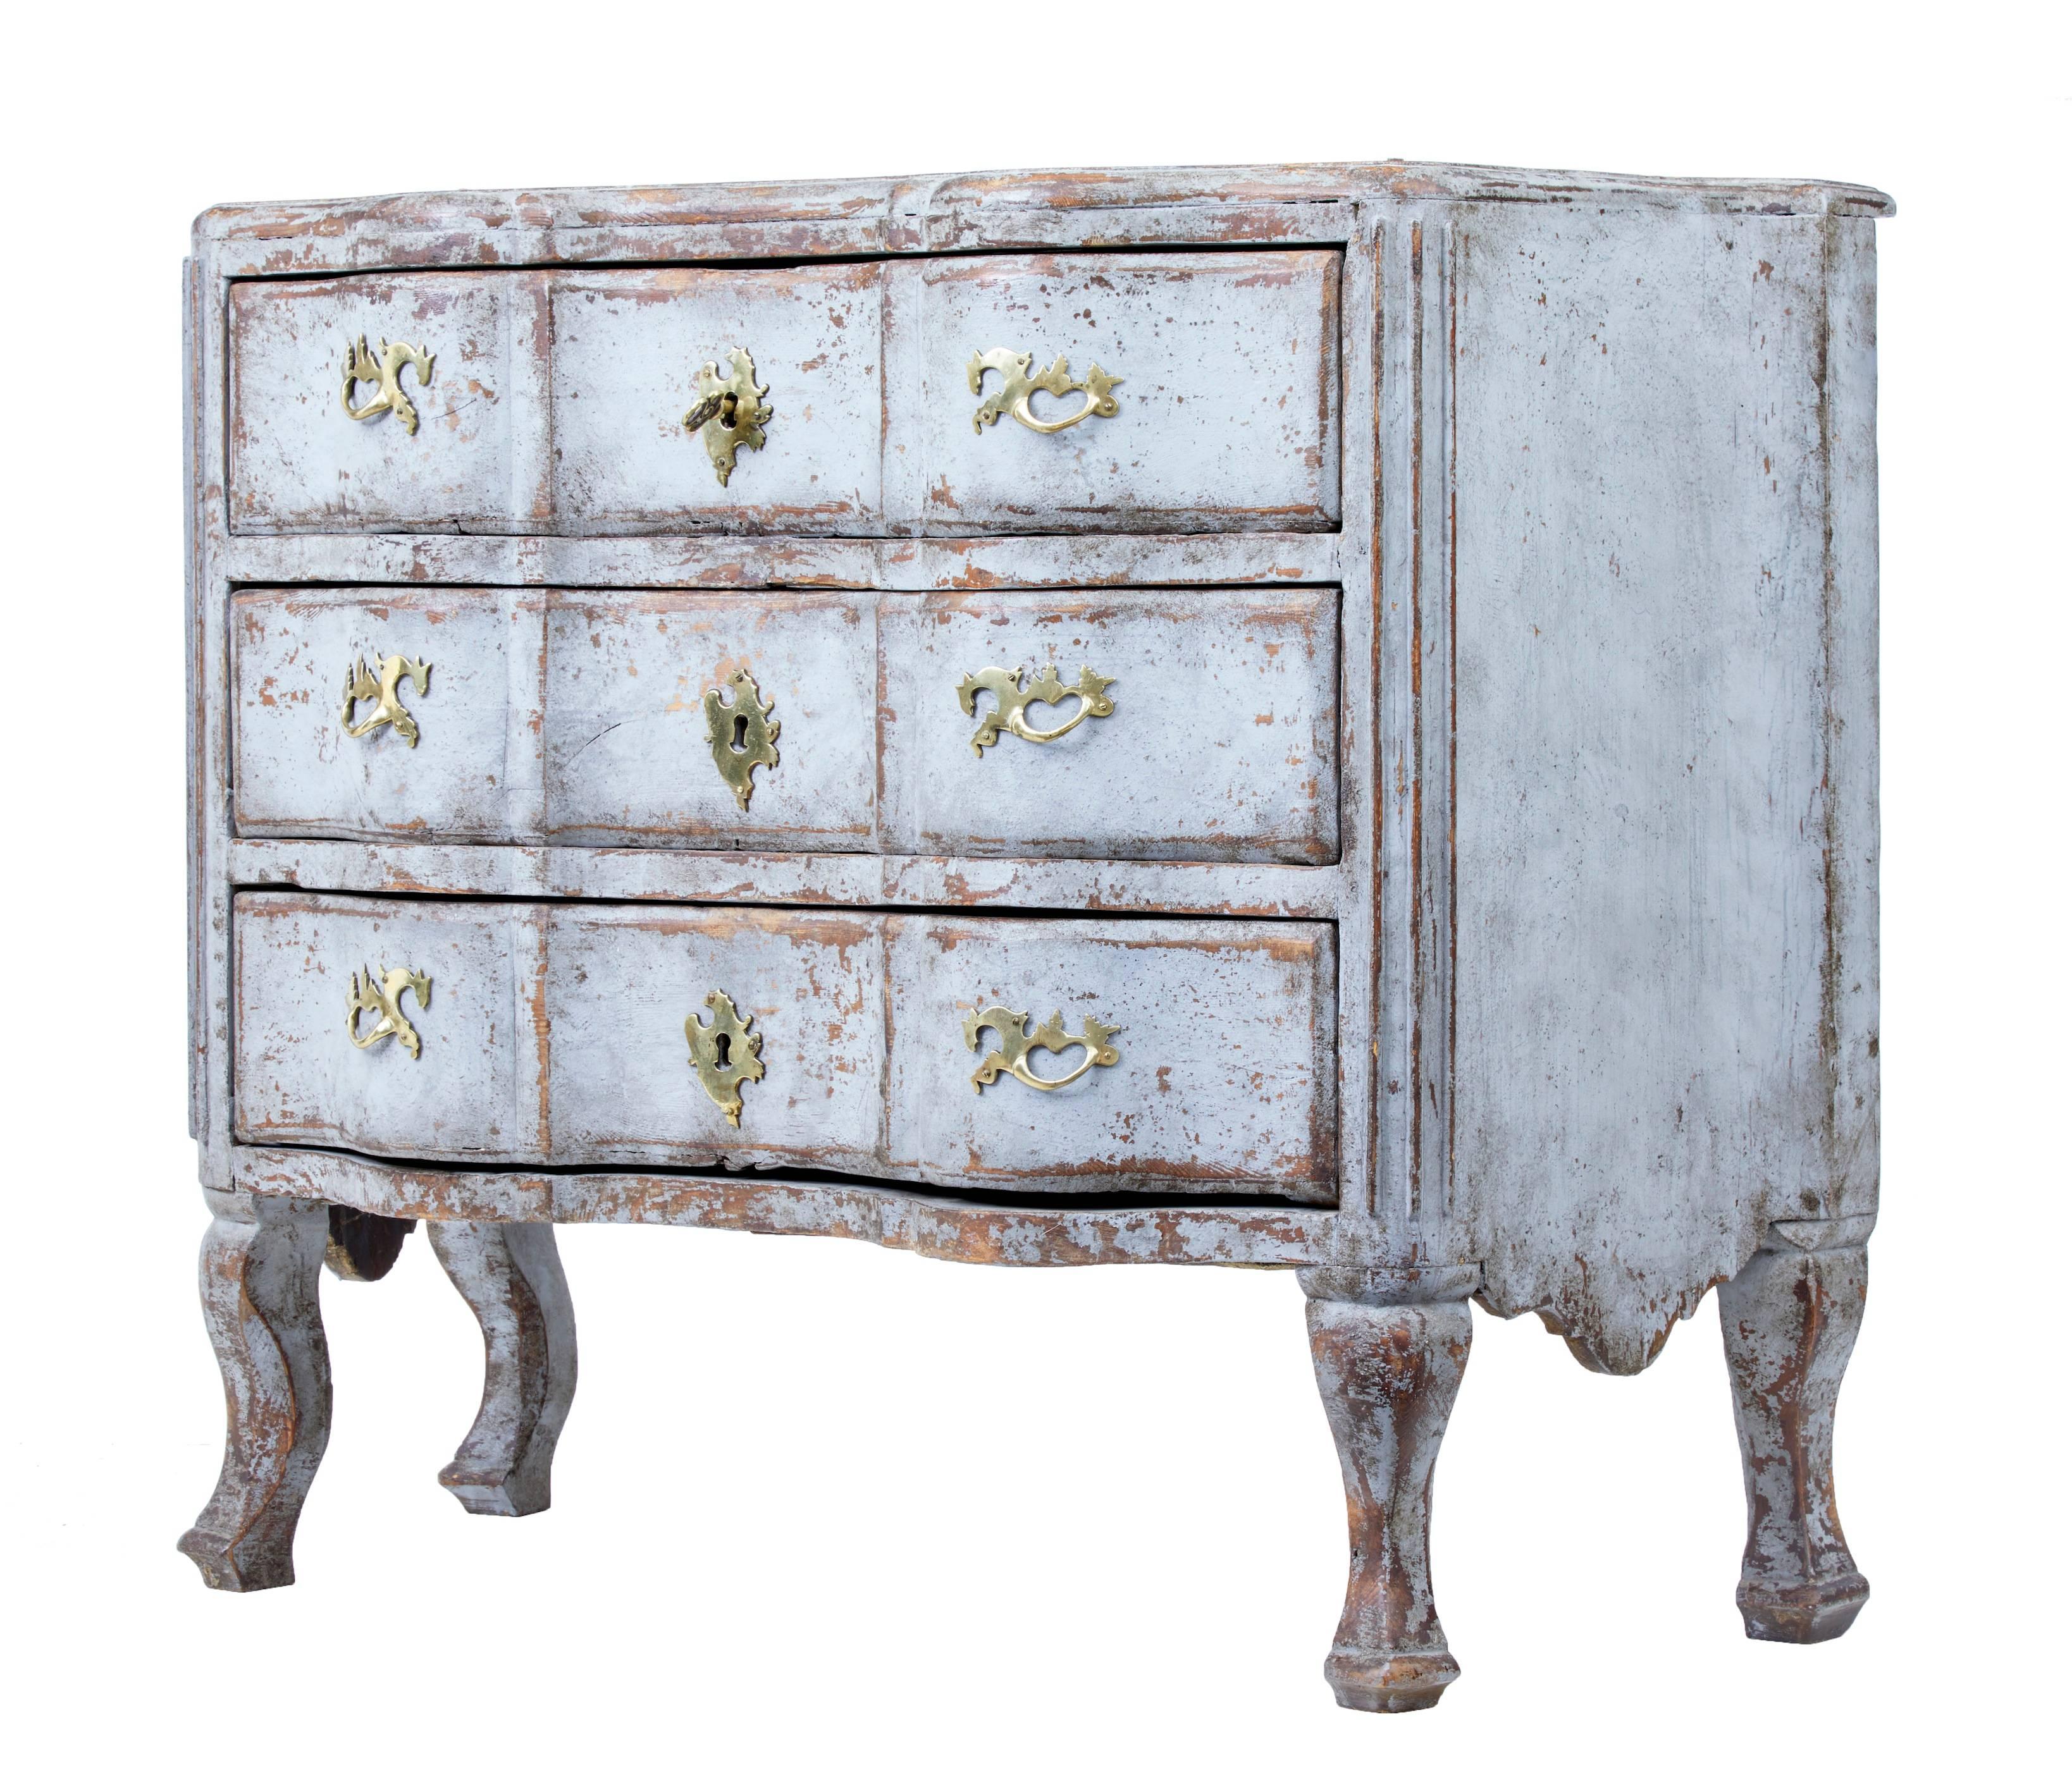 Fine quality Swedish pine chest of drawers, circa 1810.
Three-drawer chest with beautifully shaped front.
Later paint with now weathered appearance. Faux painted marble painted top.
Later brass handles.


Measures: Height 34 1/2